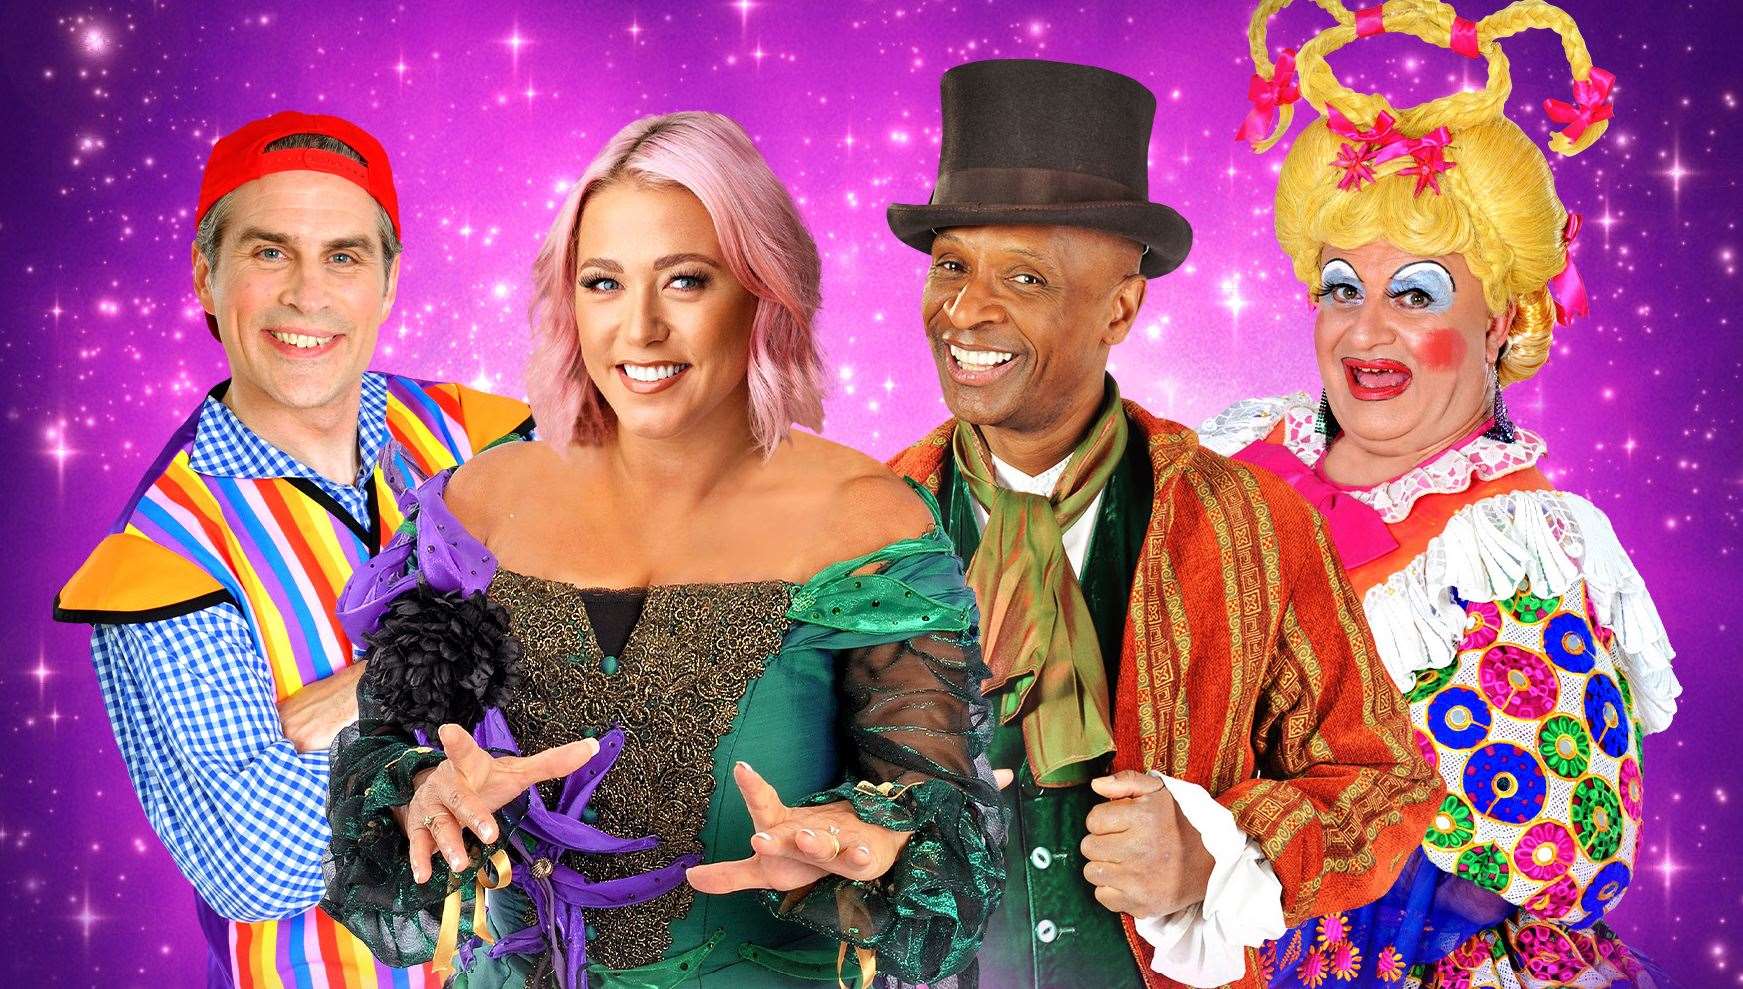 X Factor stars will be joining the Beauty and the Beast panto. Picture: White Rock Theatre